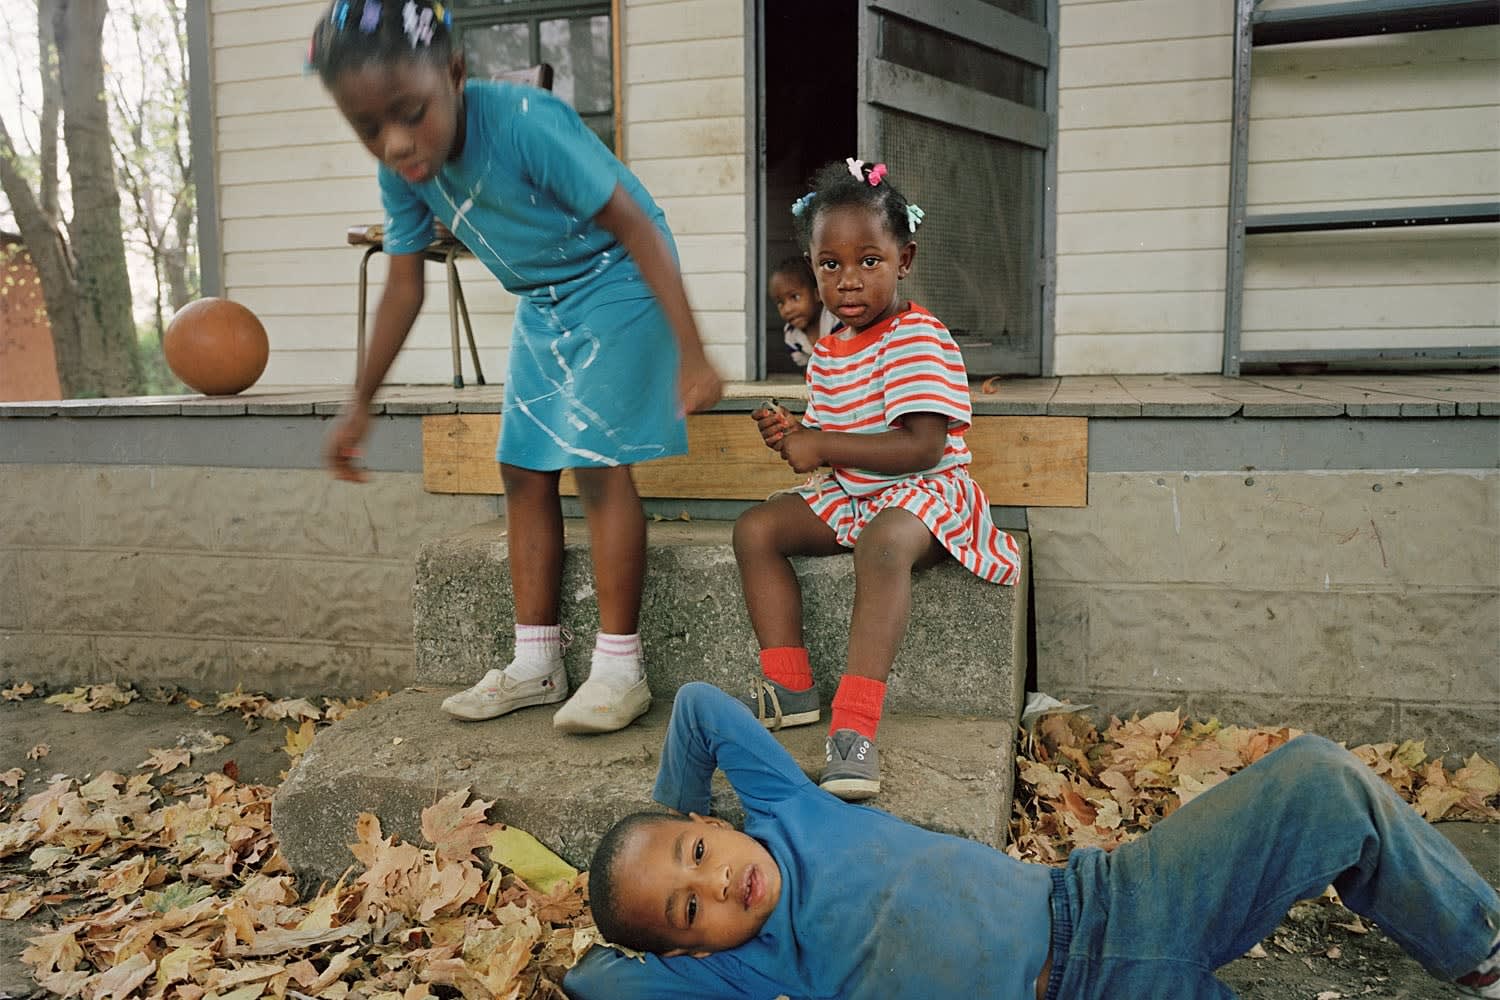 Sheron Rupp, Franklin, Tennessee, 1990